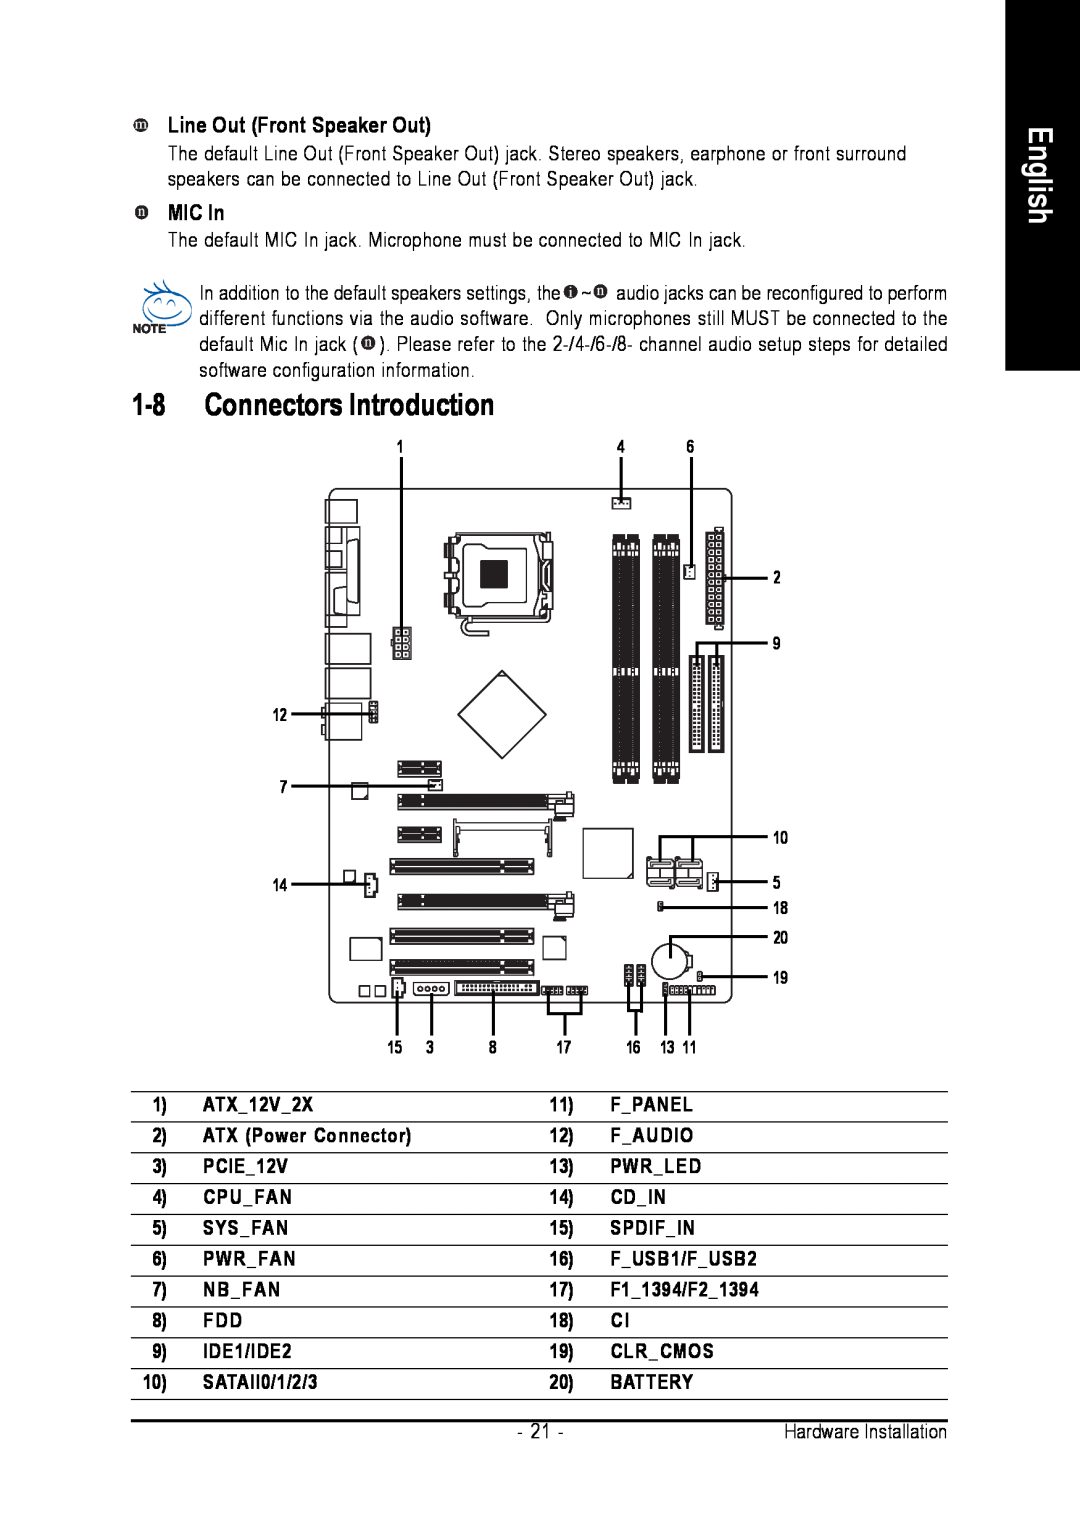 Intel GA-N650SLI-DS4 user manual Connectors Introduction, English, Line Out Front Speaker Out, MIC In 